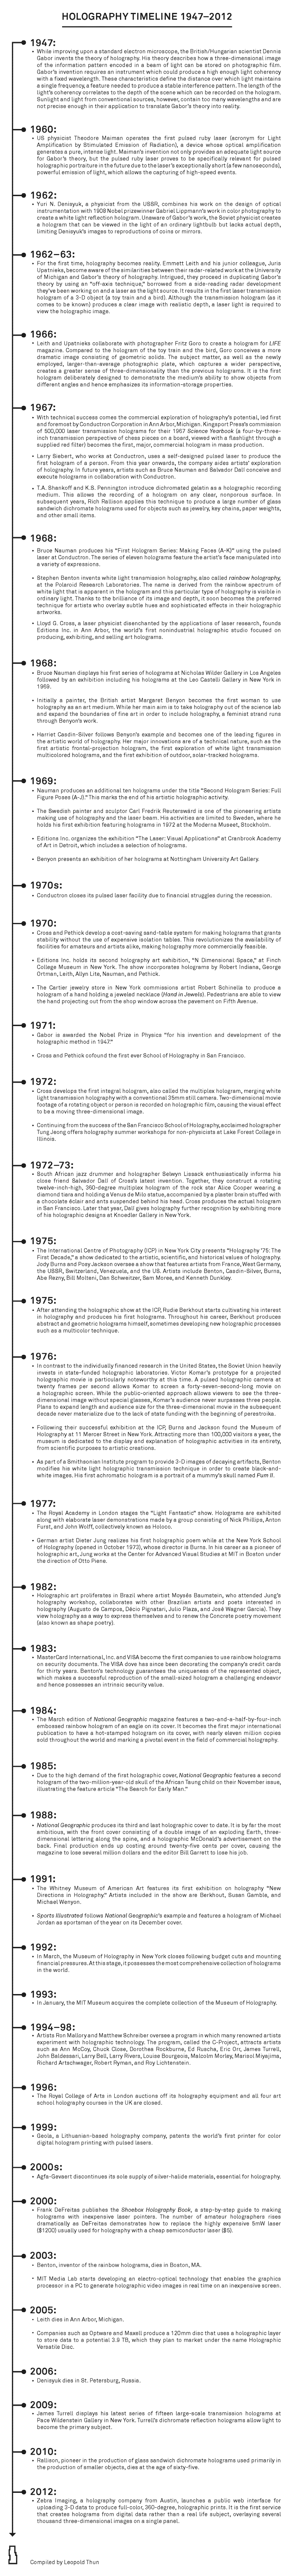 Timeline of holographic technology innovation from 1947 to 2012 (present day)